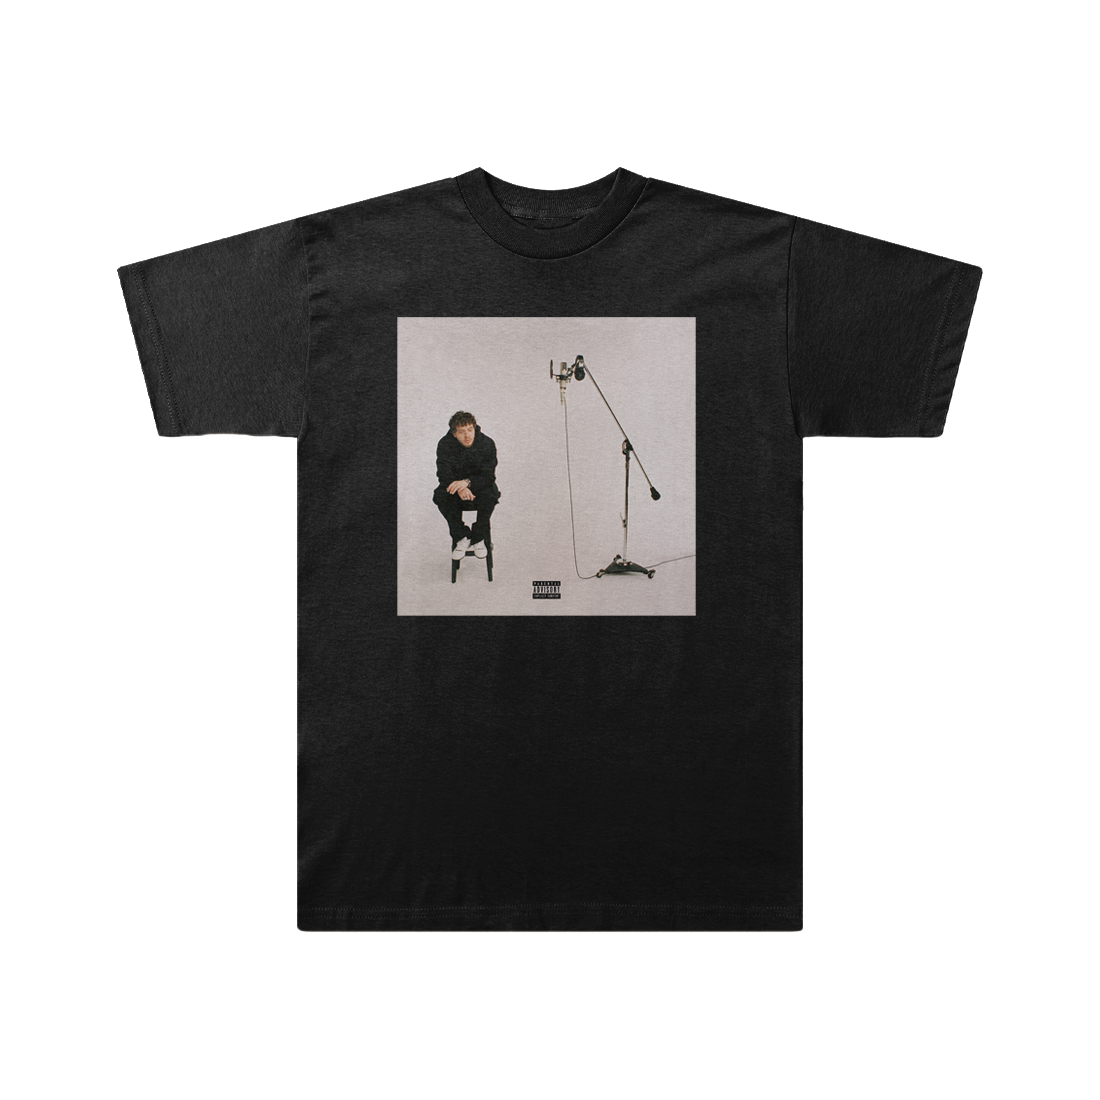 Come Home The Kids Miss You T-Shirt + CD Box Set – Jack Harlow